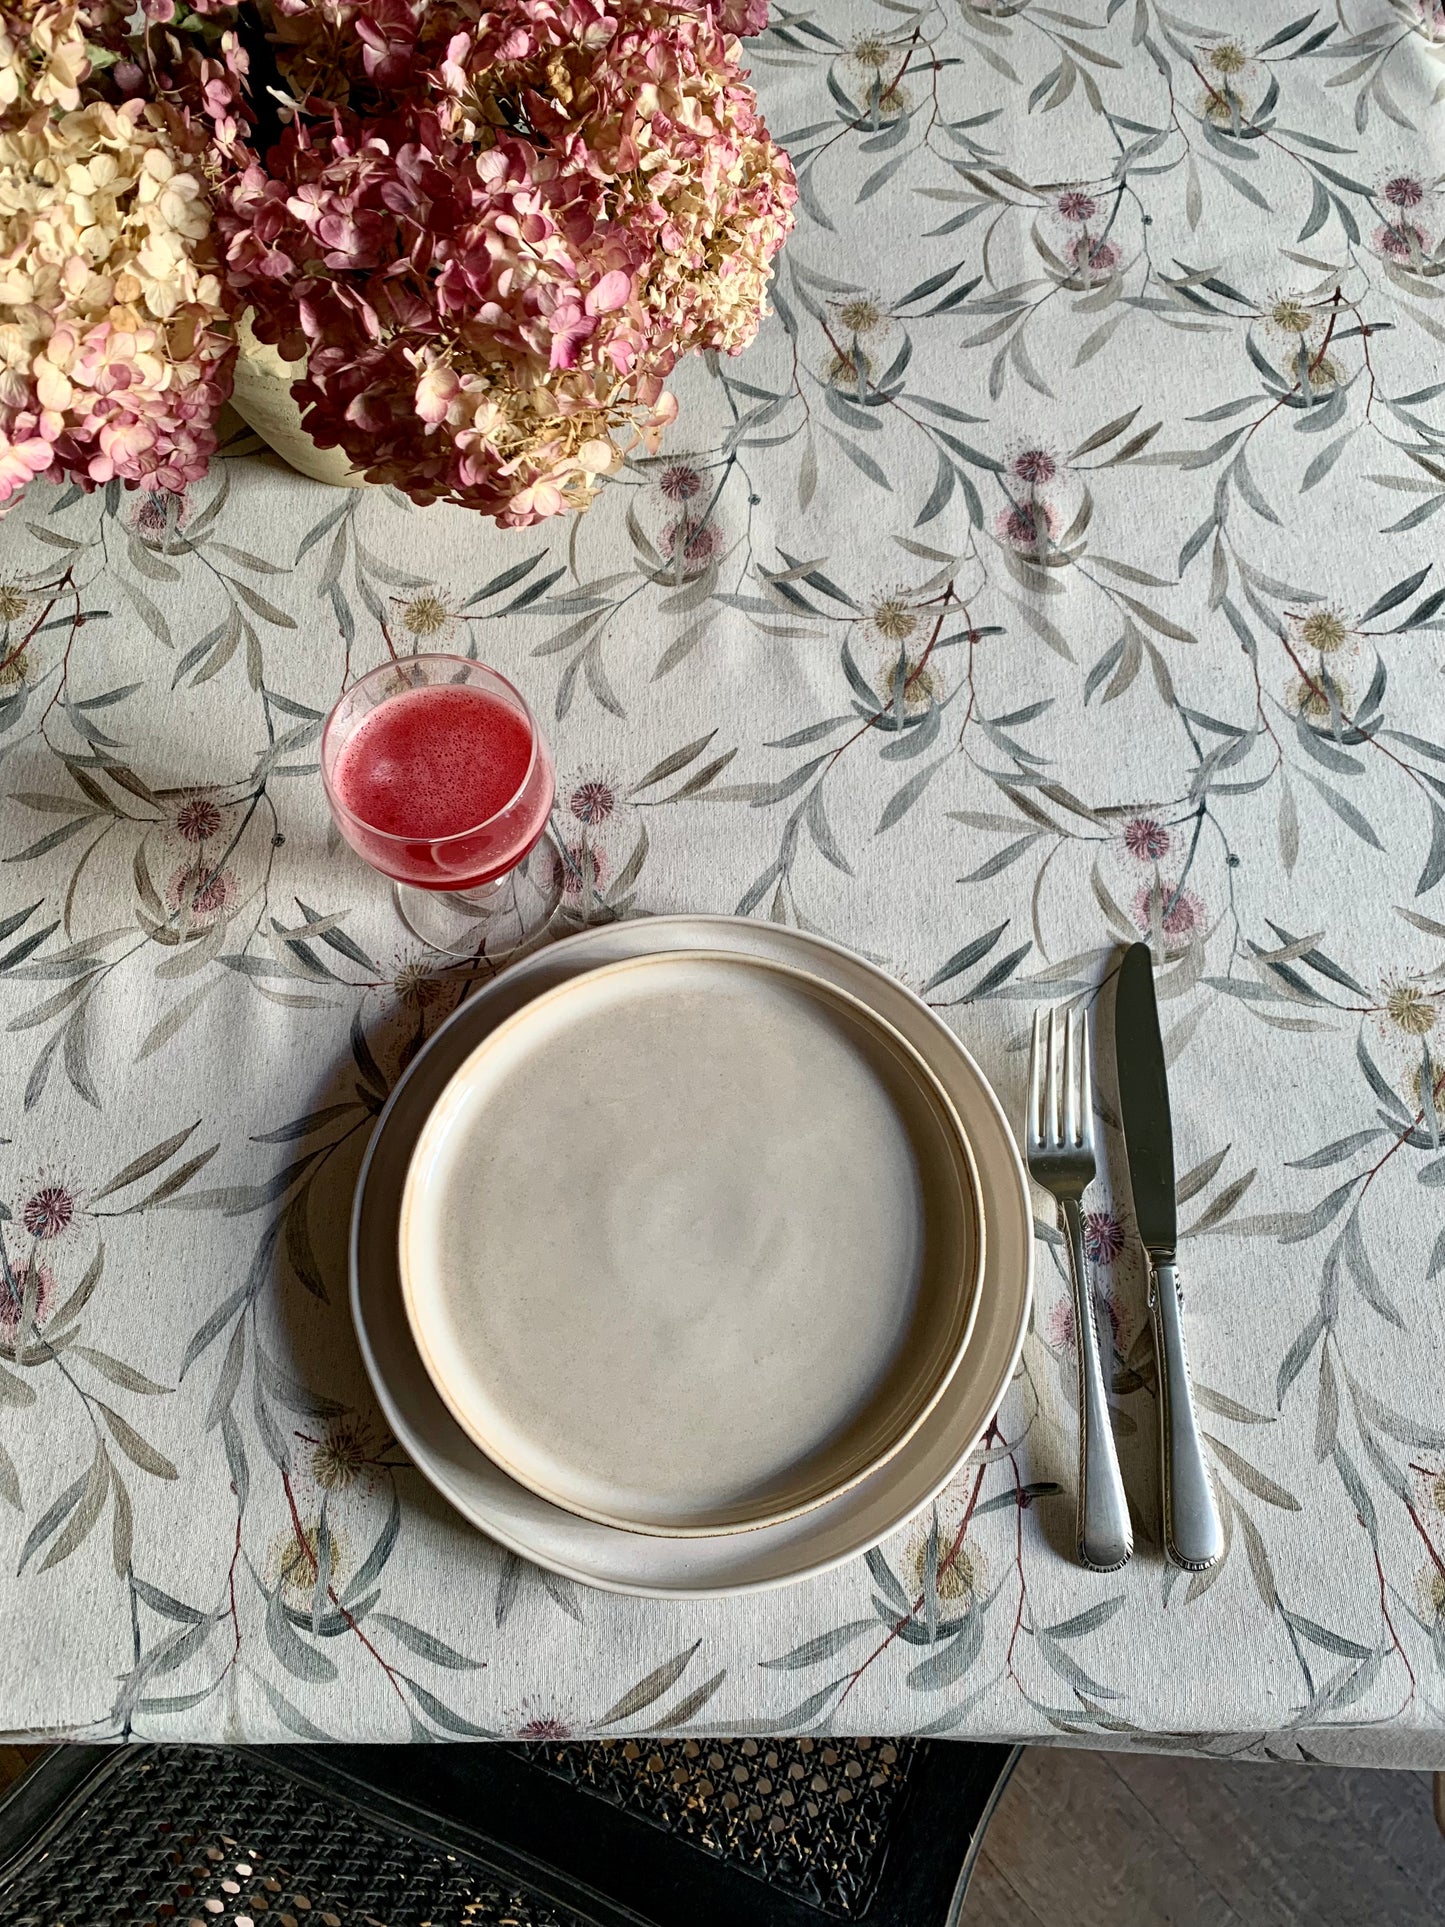 Rectangular Tablecloth, Recycled Cotton, Printed | Pipo Fresno